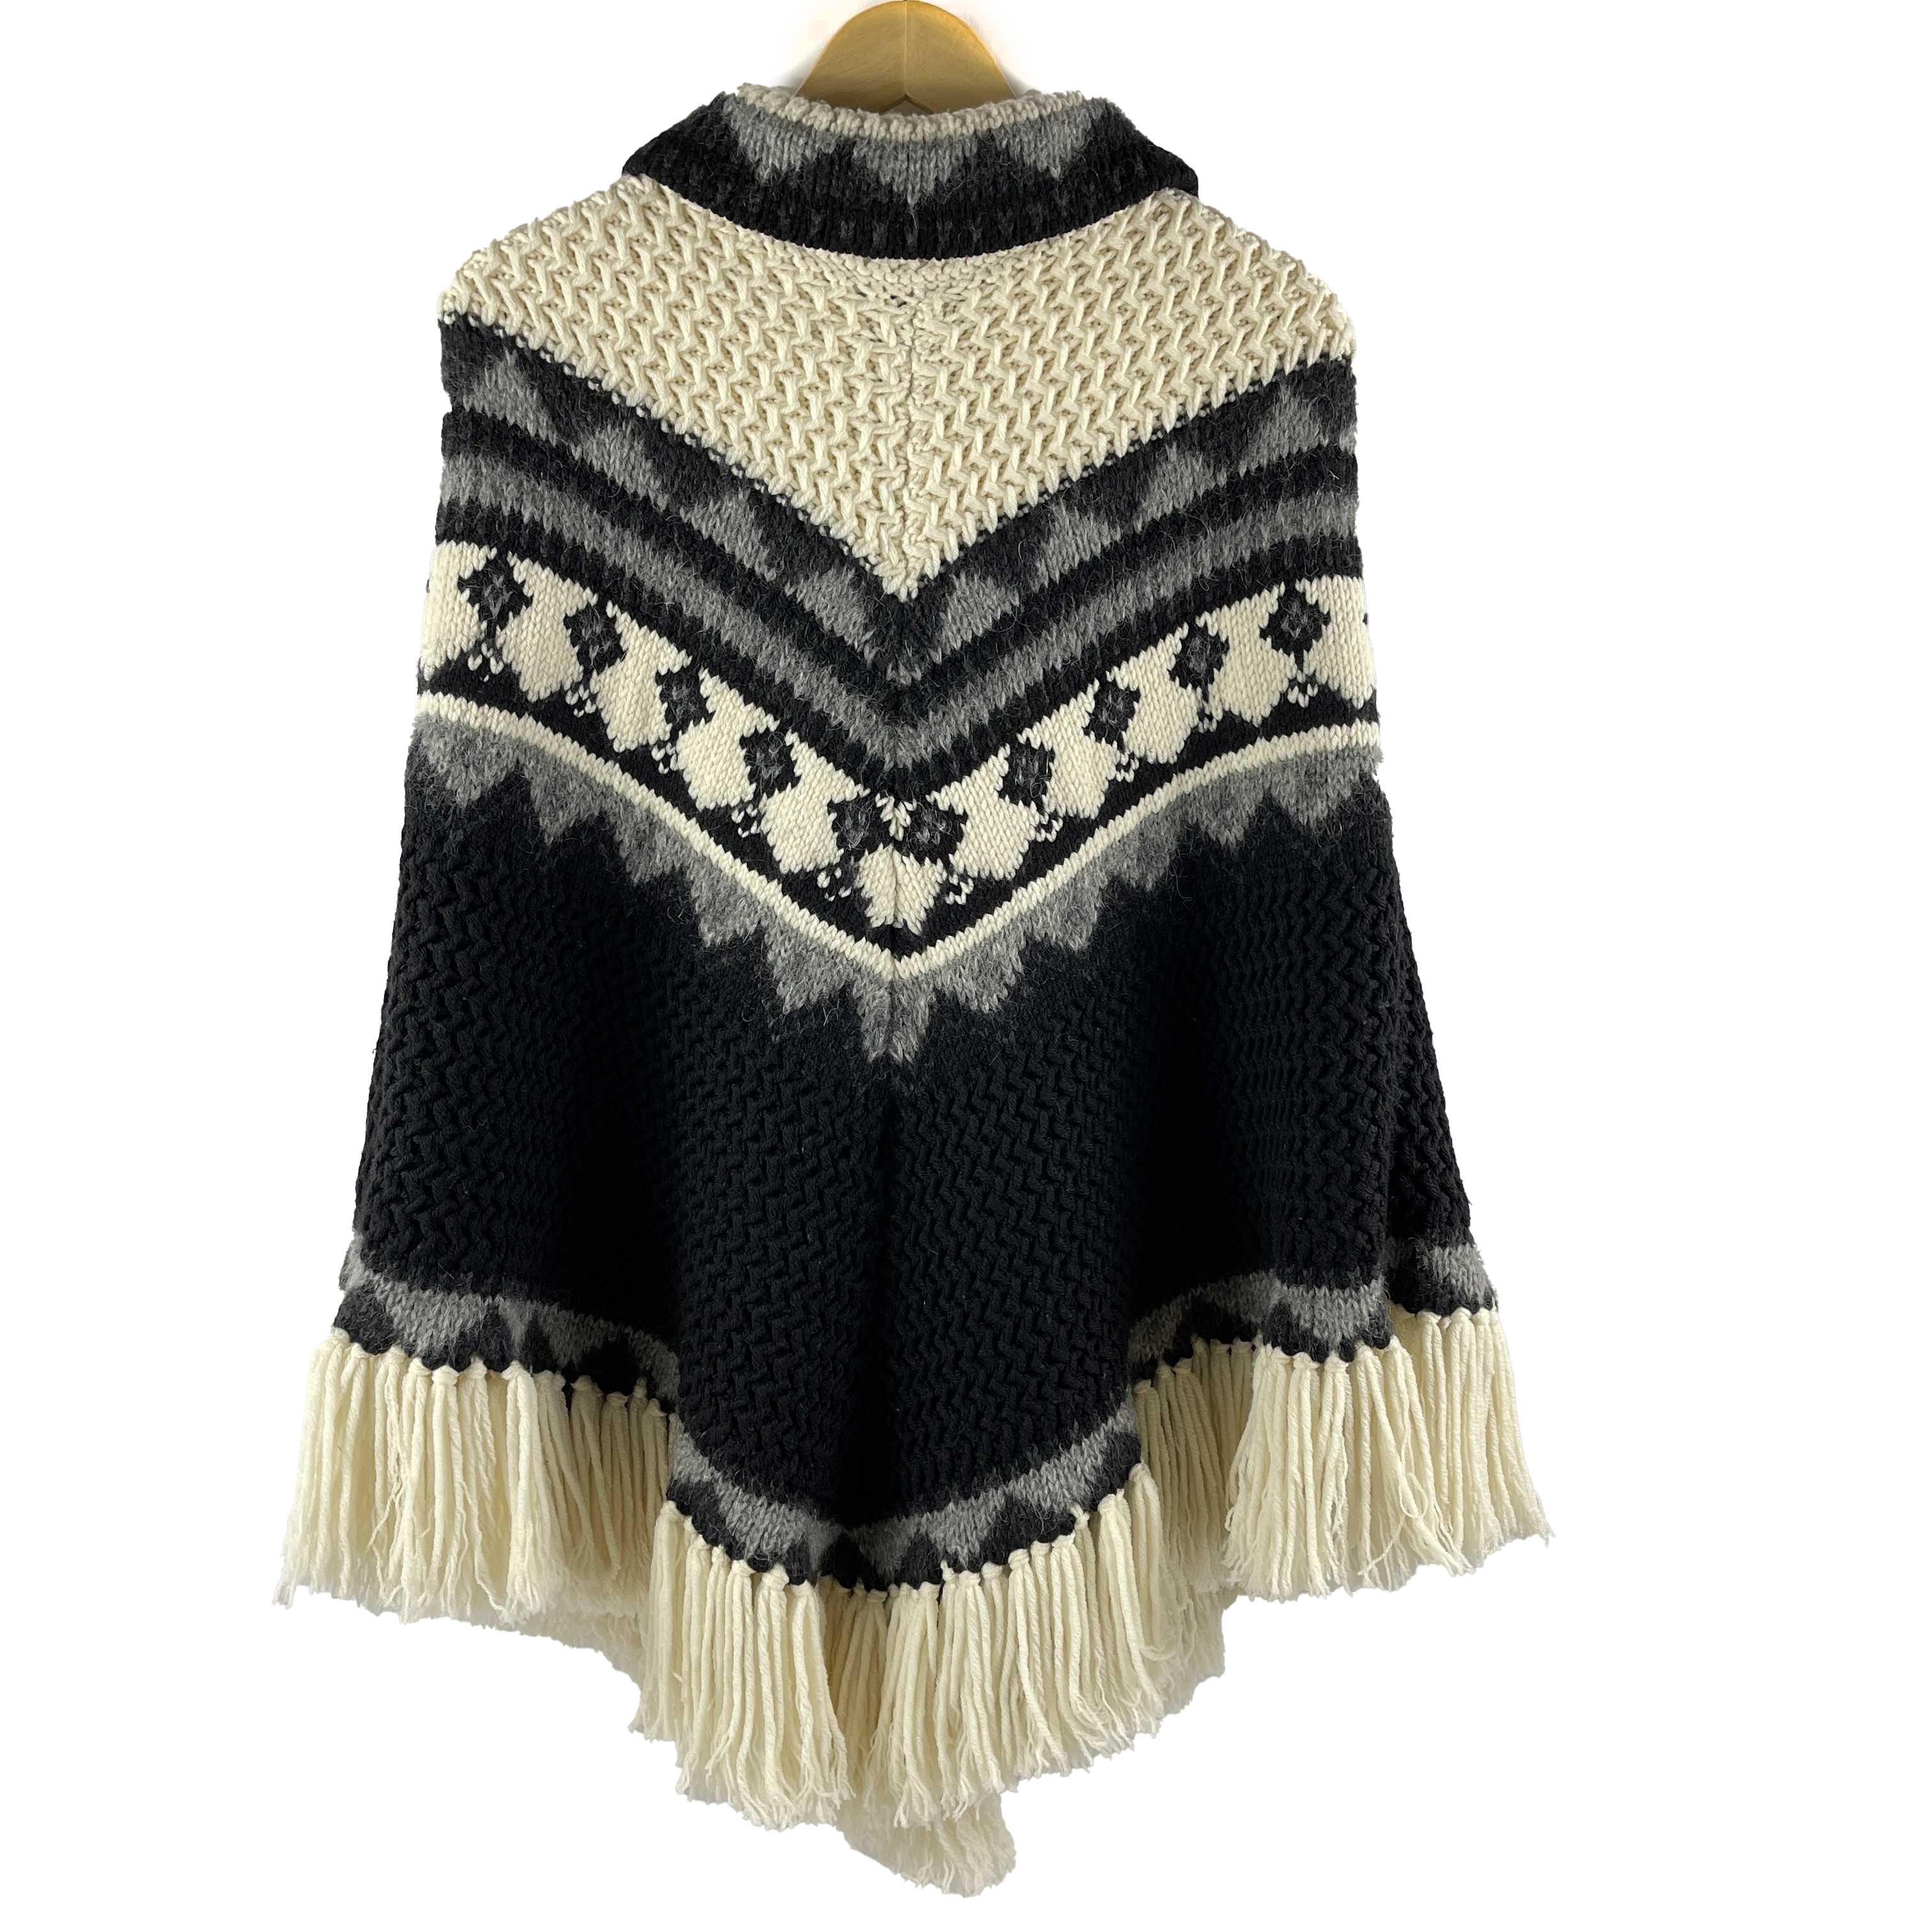 Saint Laurent - Pristine - Fringe Knit Pom Pom Tassel Poncho - Black, Gray, Ivory - XS S M - Top

Description

This Saint Laurent poncho is crafted with a wool blend and features varied knit textures and designs throughout.
It also contains a